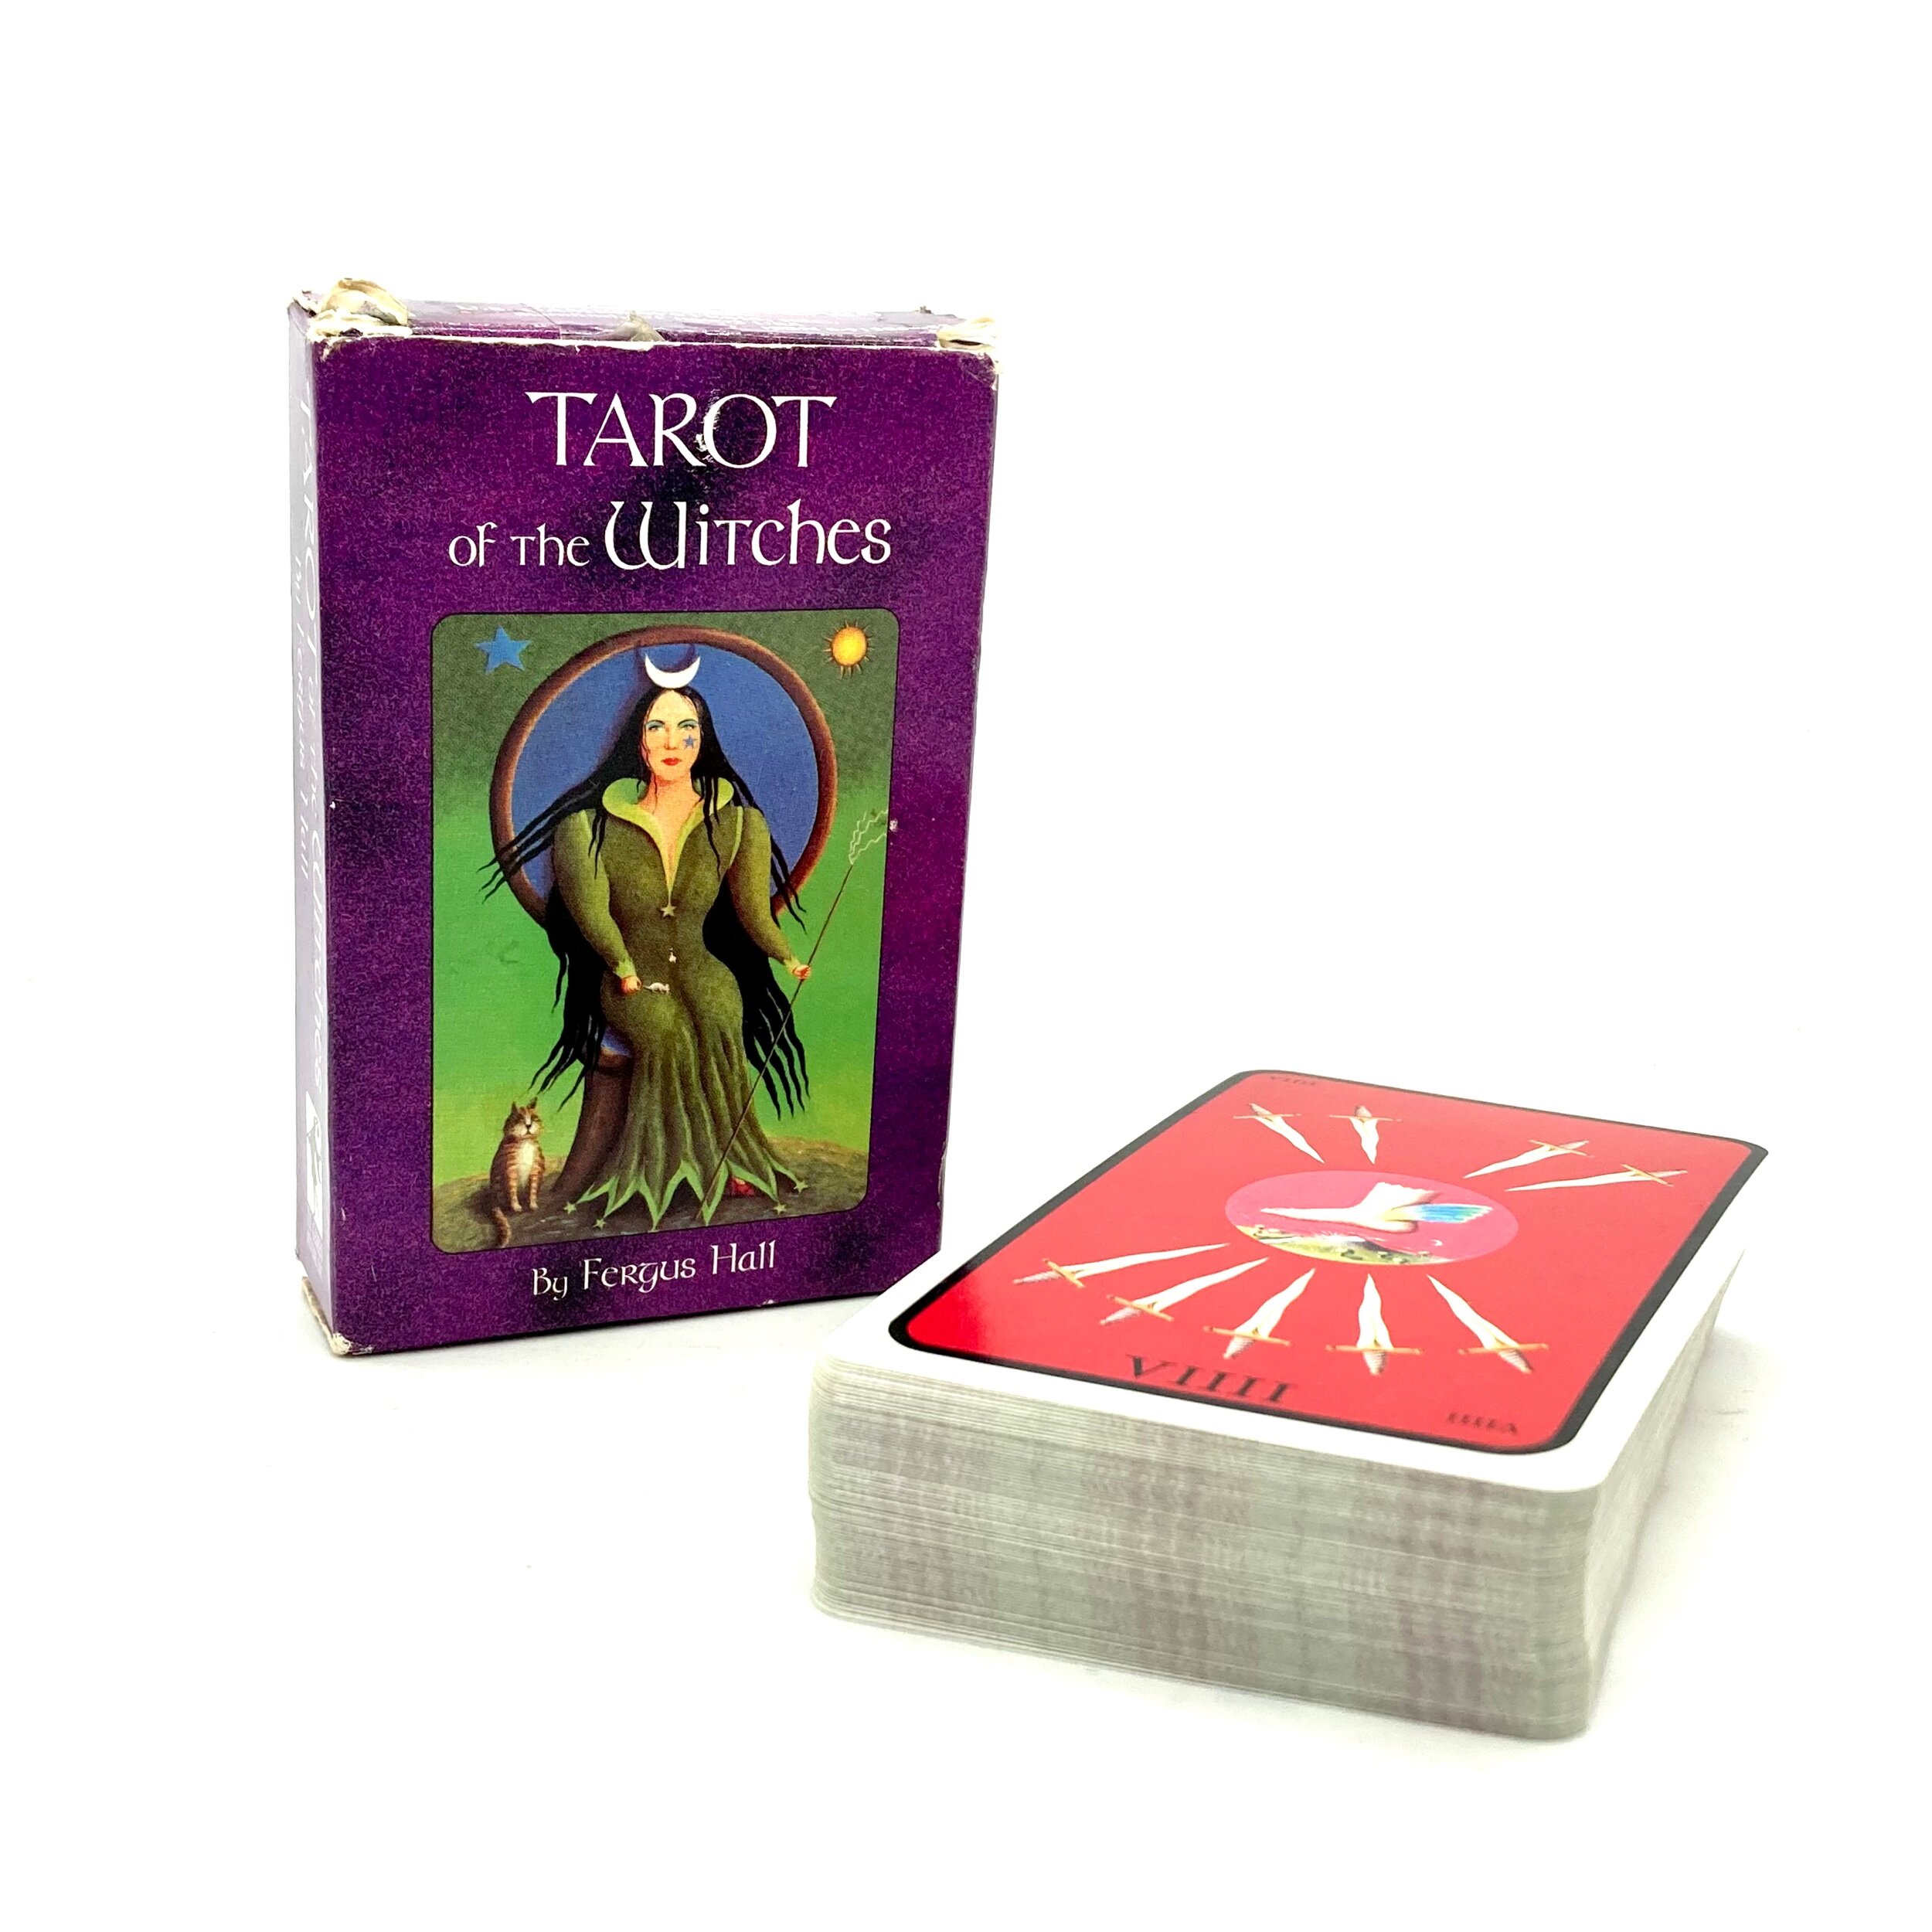 Fisker milits Fjendtlig "Tarot of the Witches" by Fergus Hall [US Games Systems, 2001] — Buzz  Bookstore